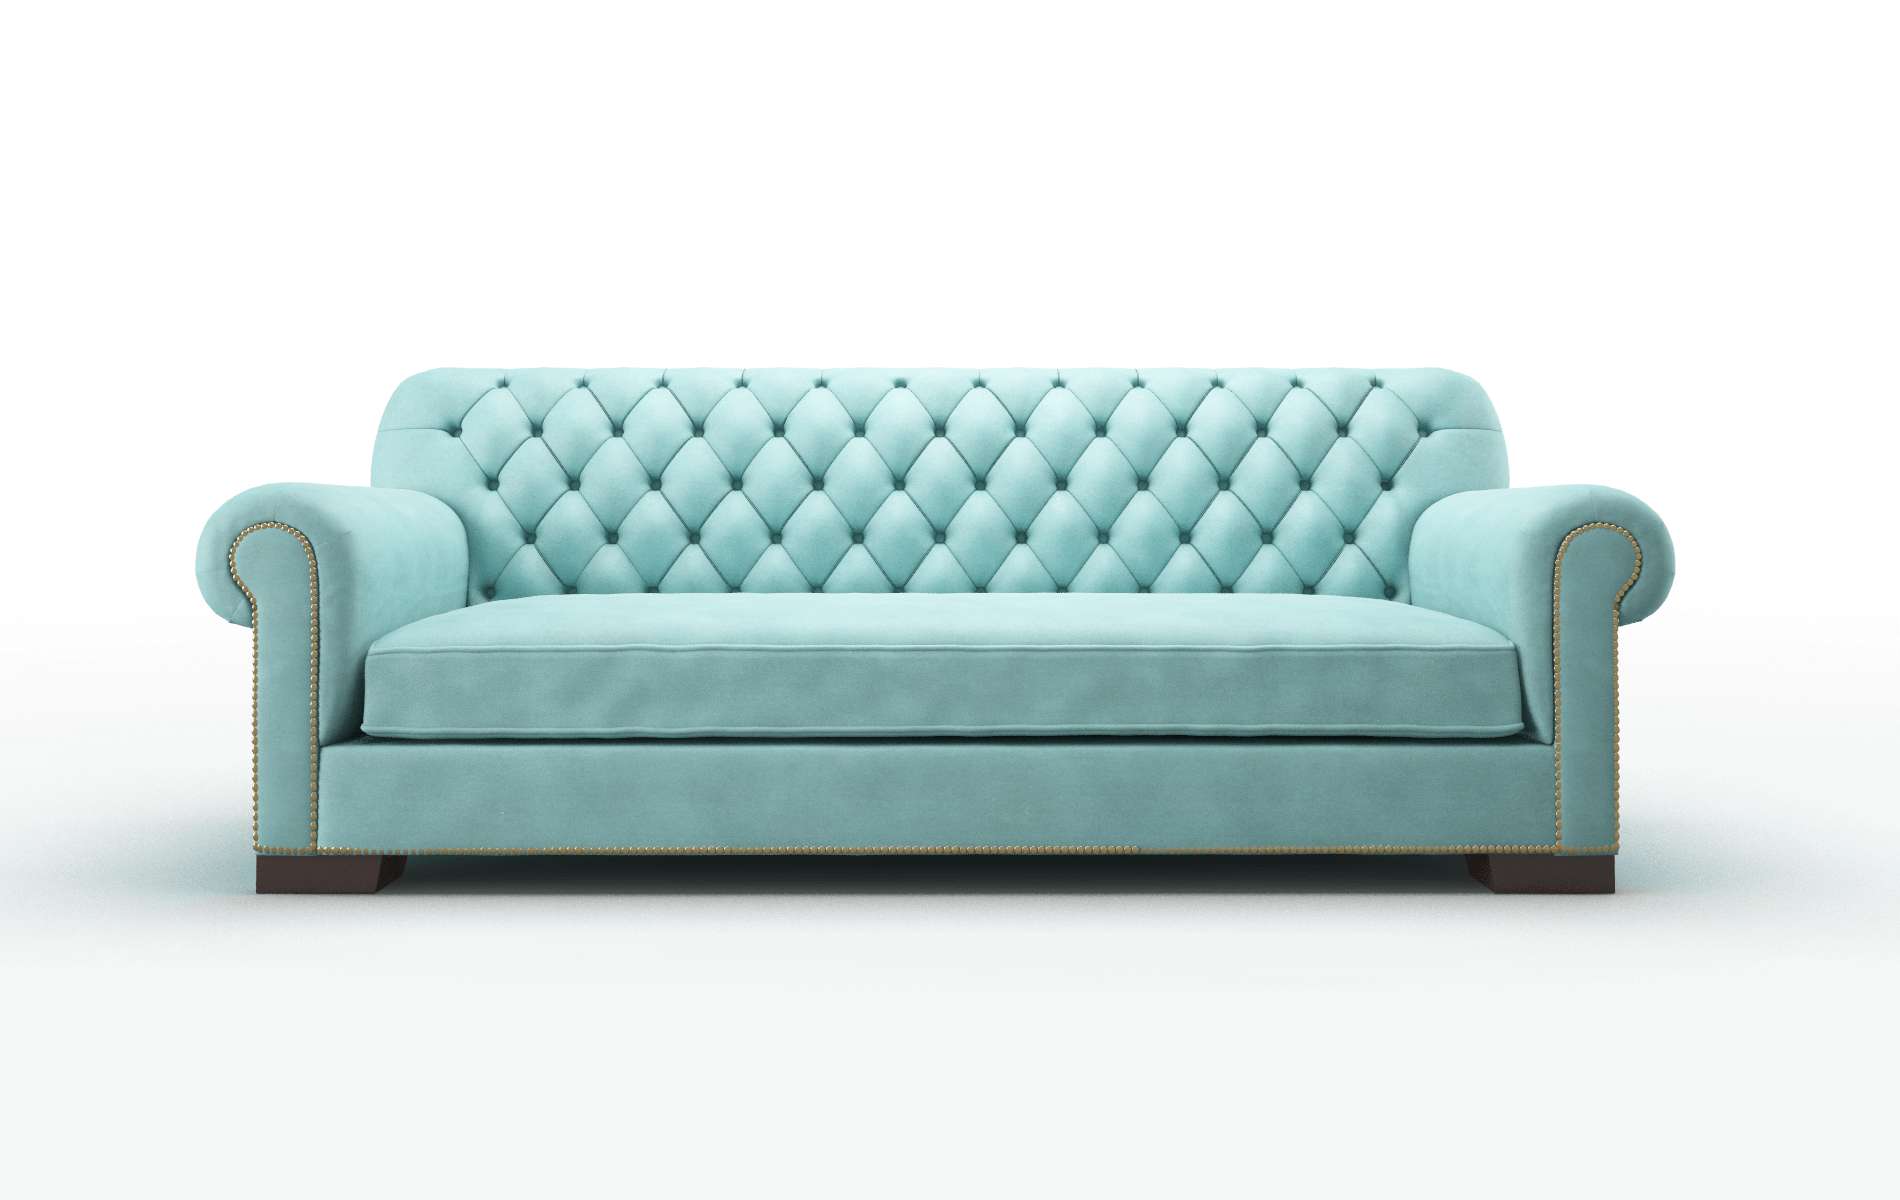 Chester Curious Turquoise chair espresso legs